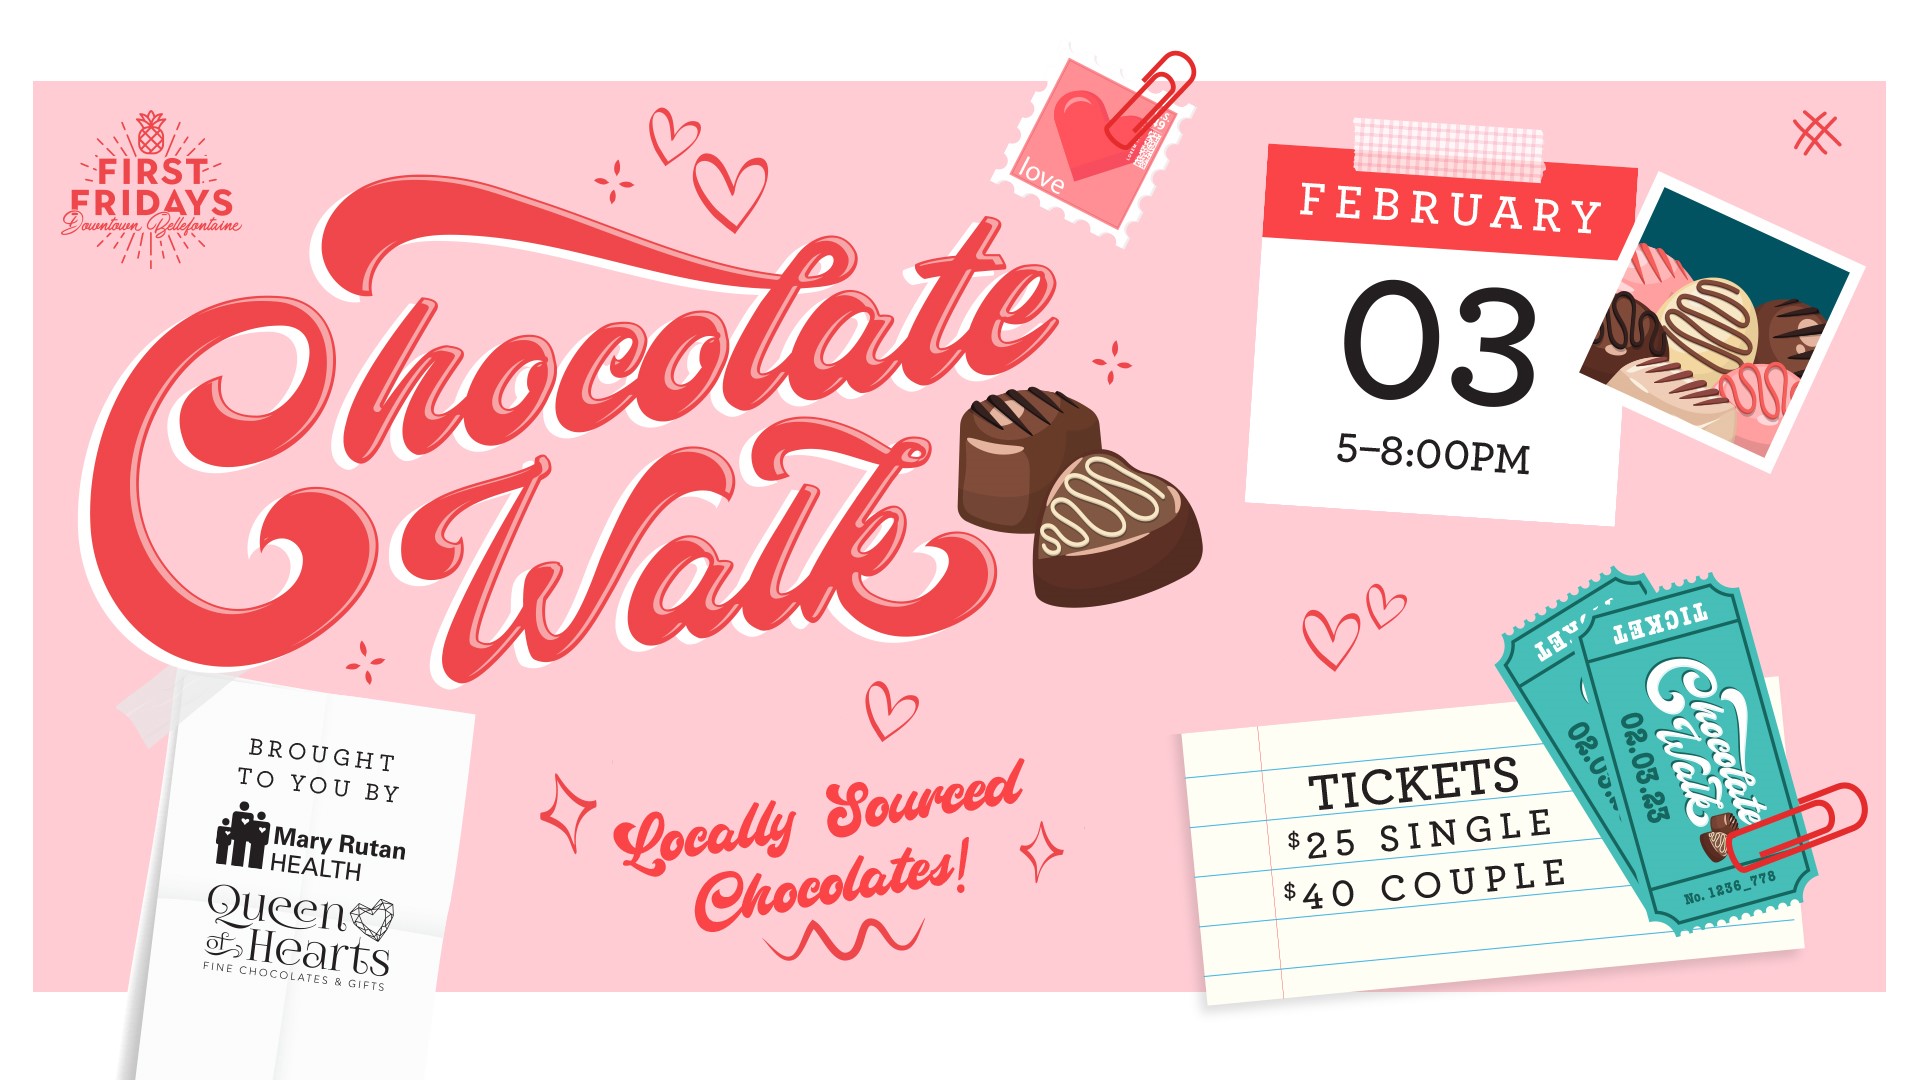 Queen of Hearts Presents the Downtown Bellefontaine Chocolate Walk